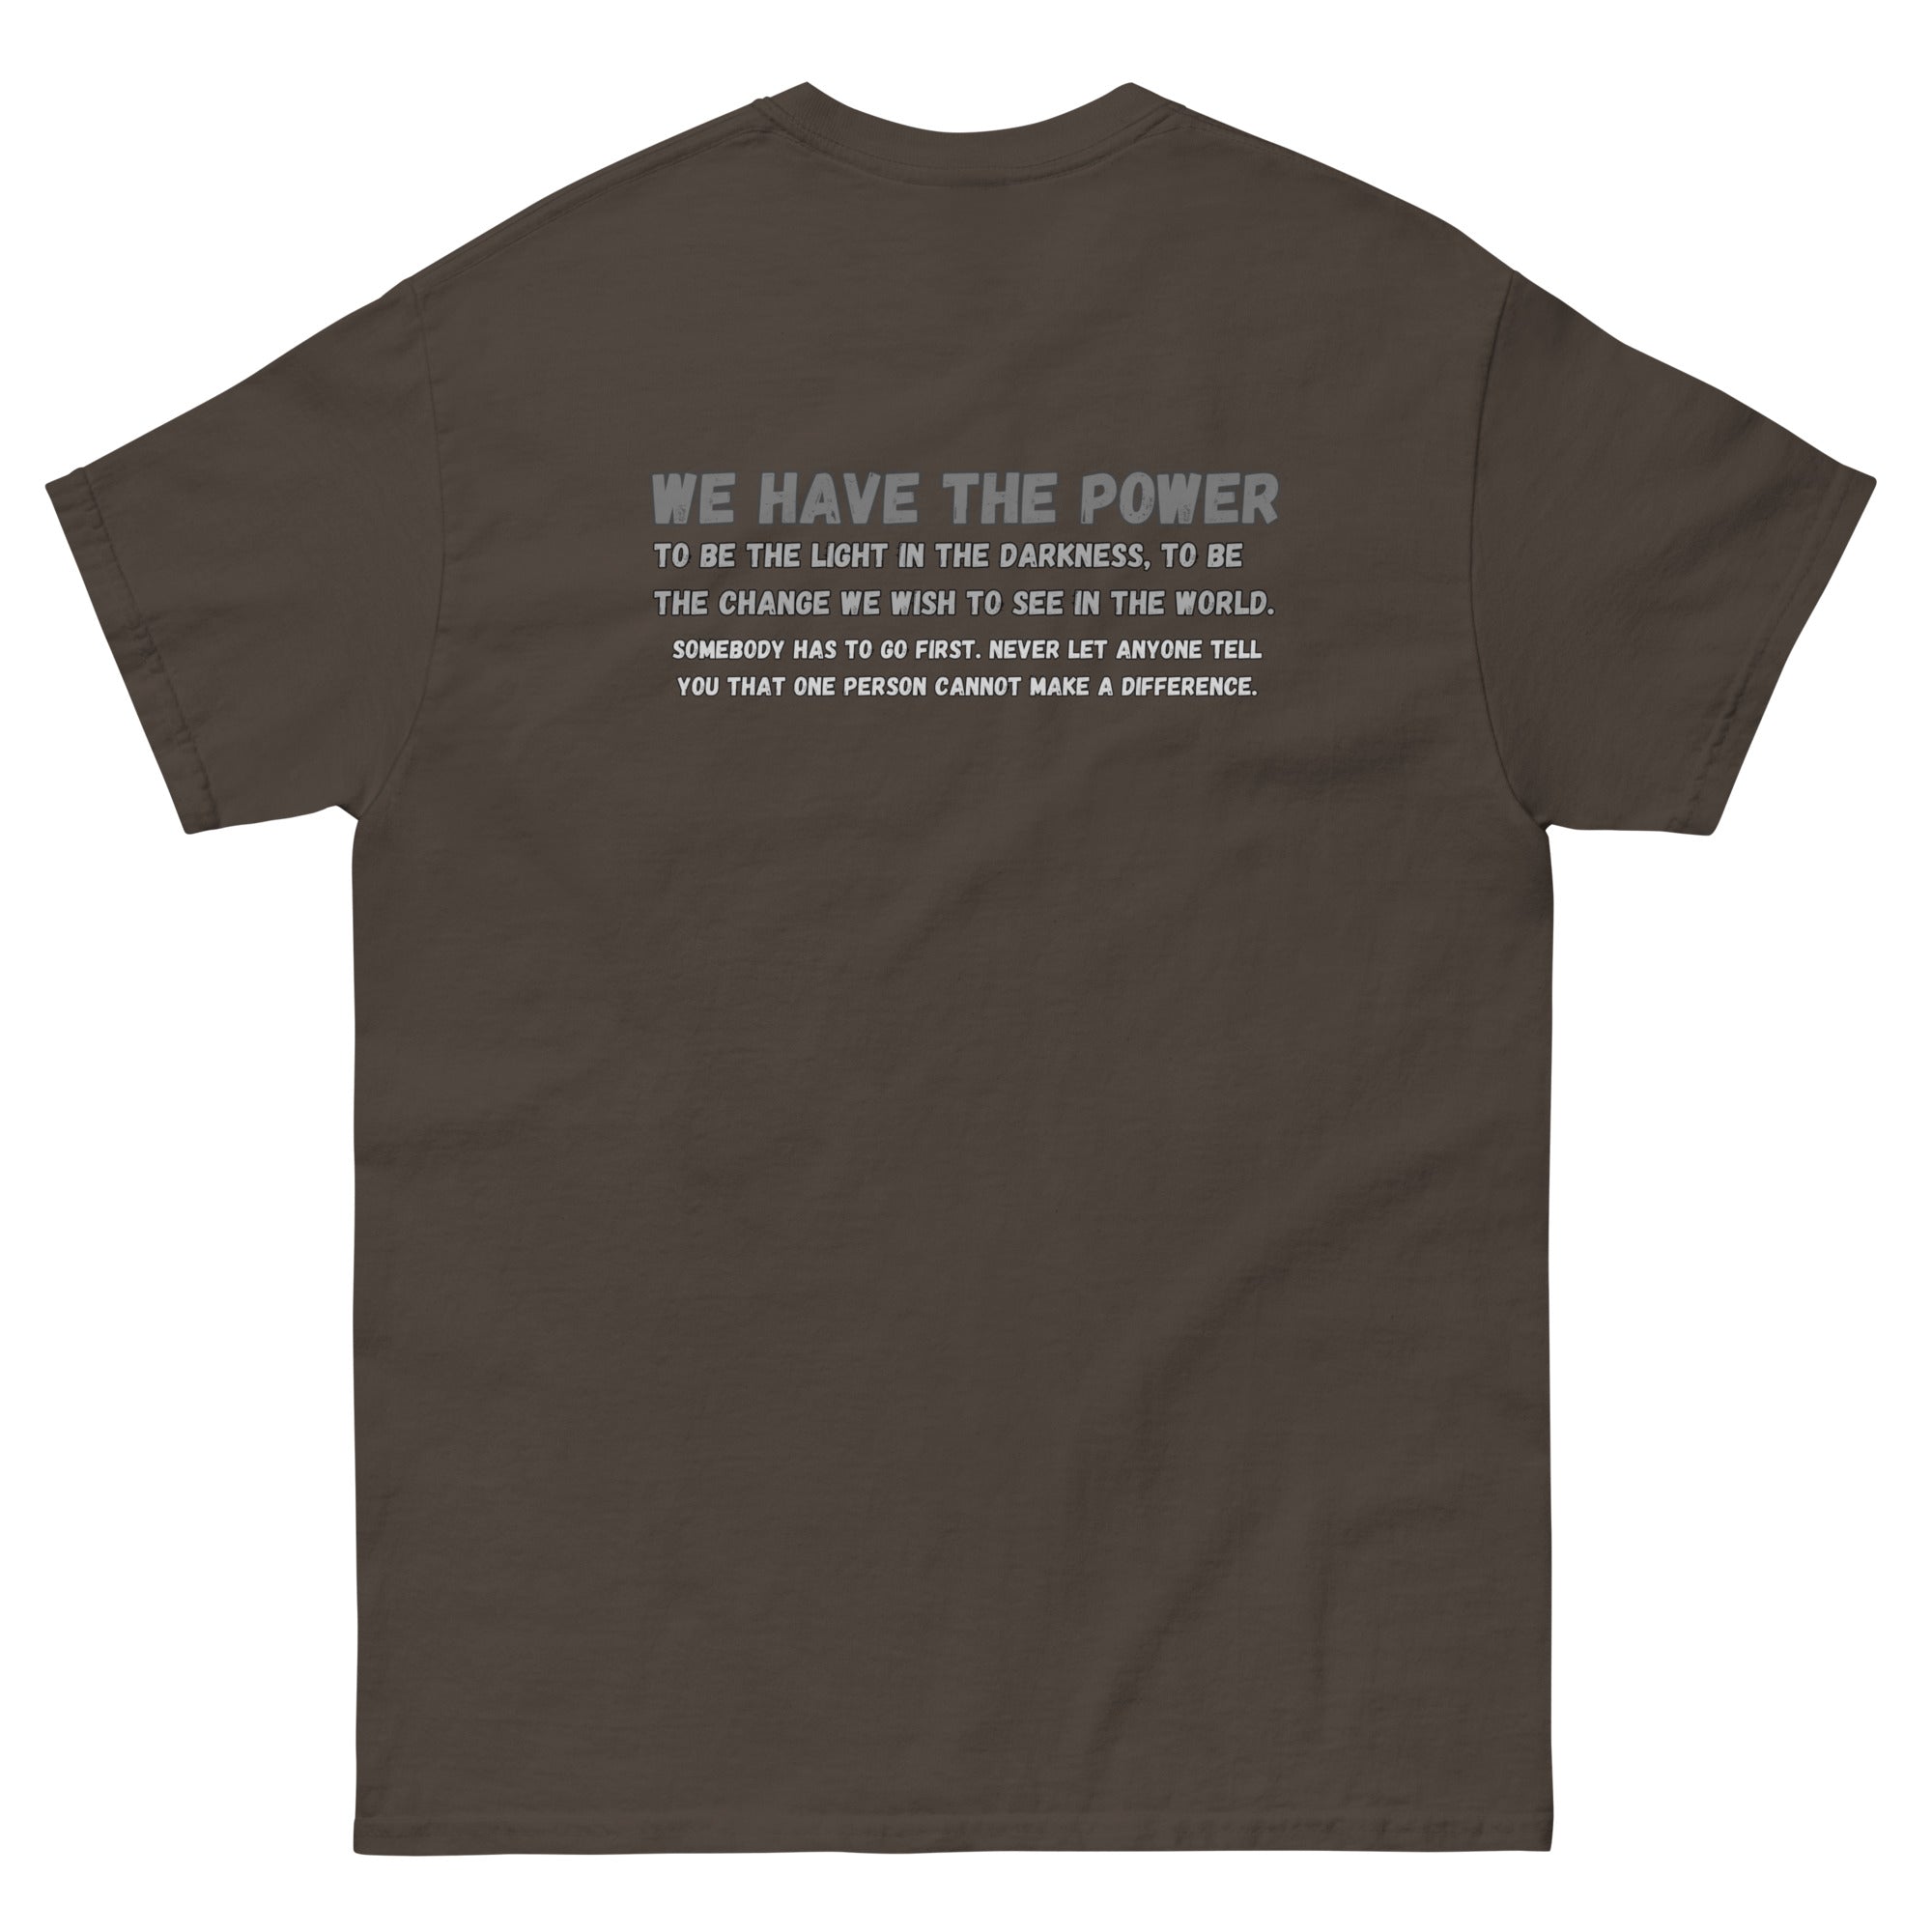 We have the power-Men's classic tee